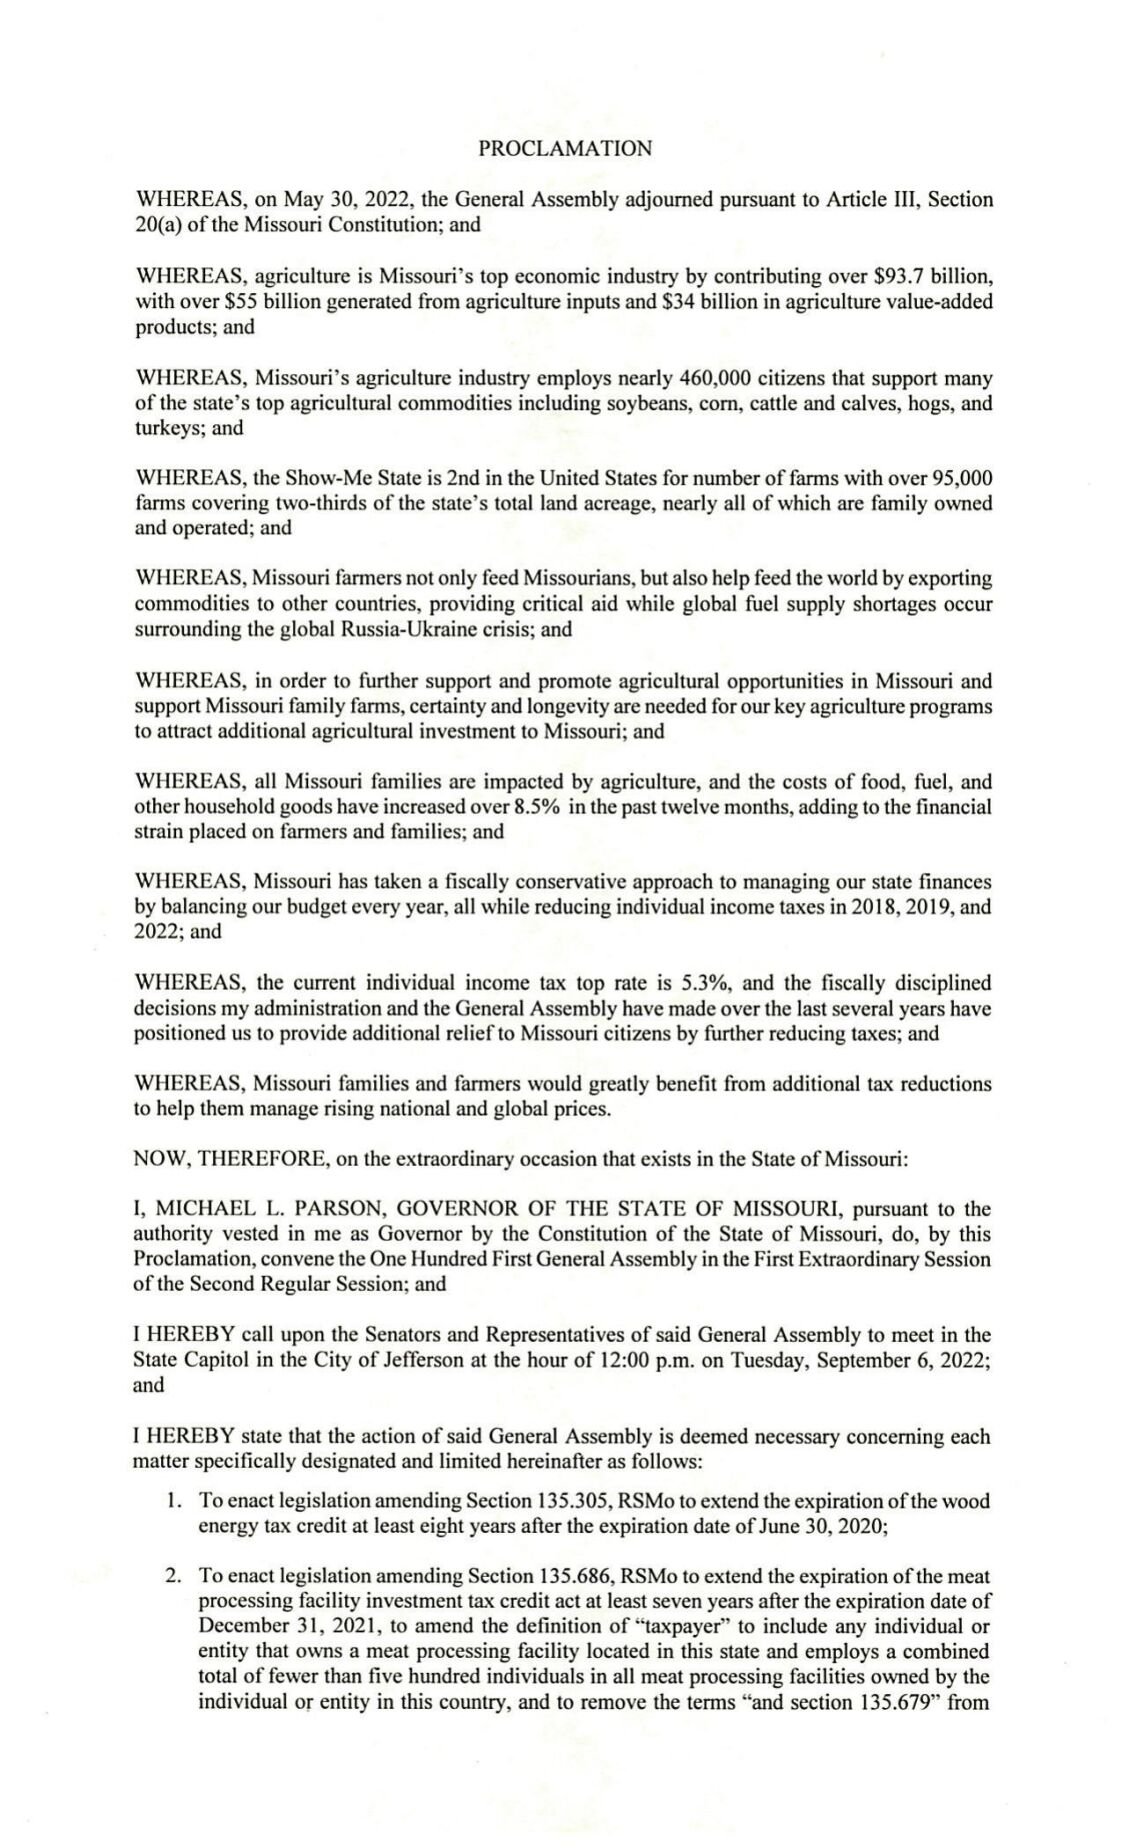 Parson proclamation for special session on 9/6/22